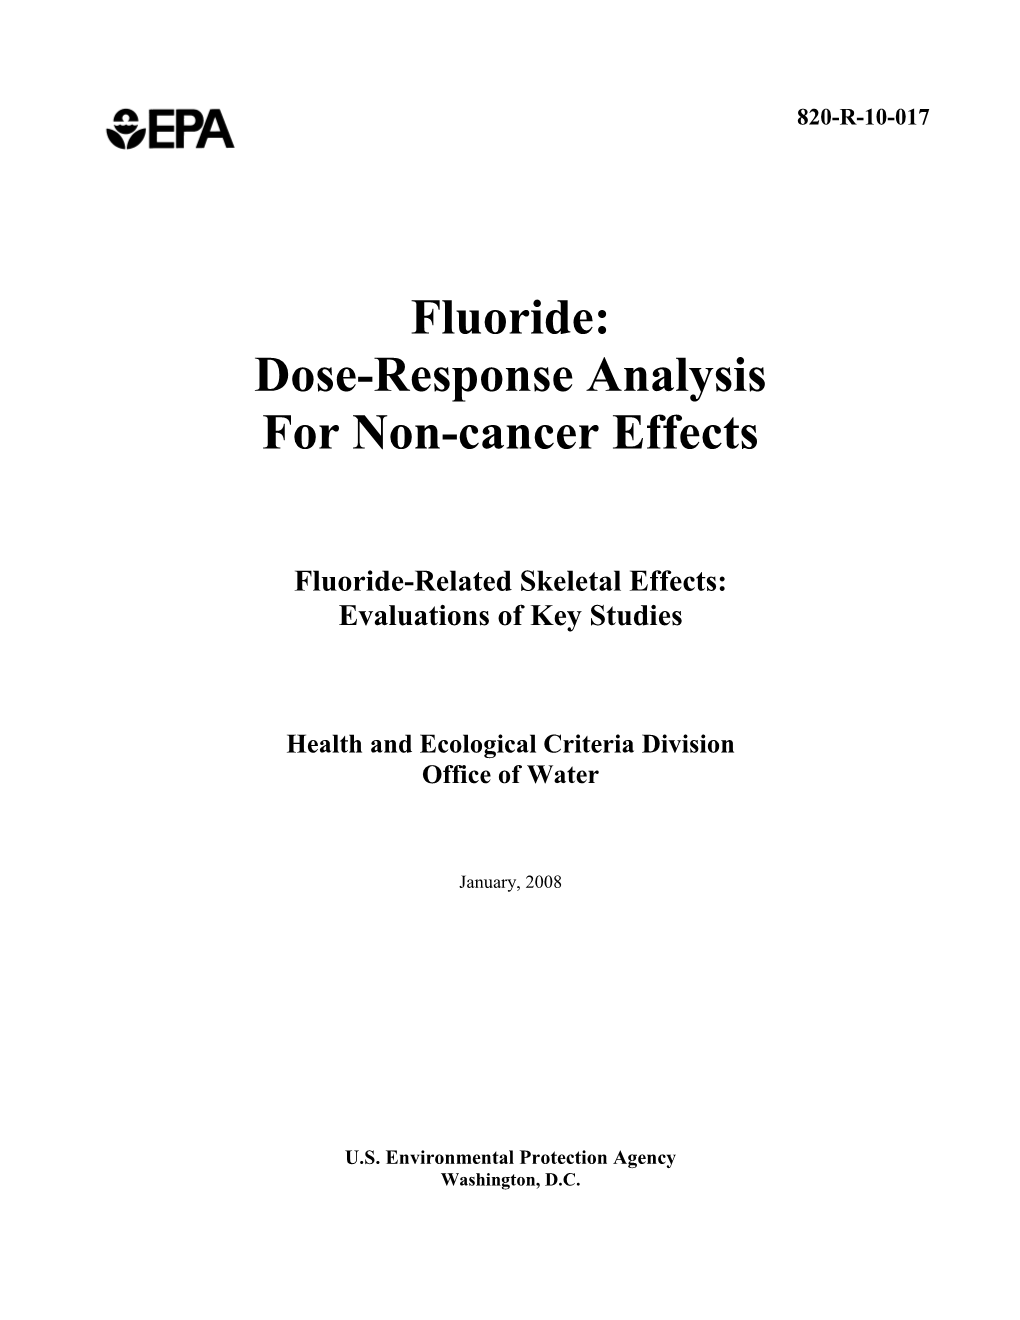 Fluoride: Dose-Response Analysis for Non-Cancer Effects